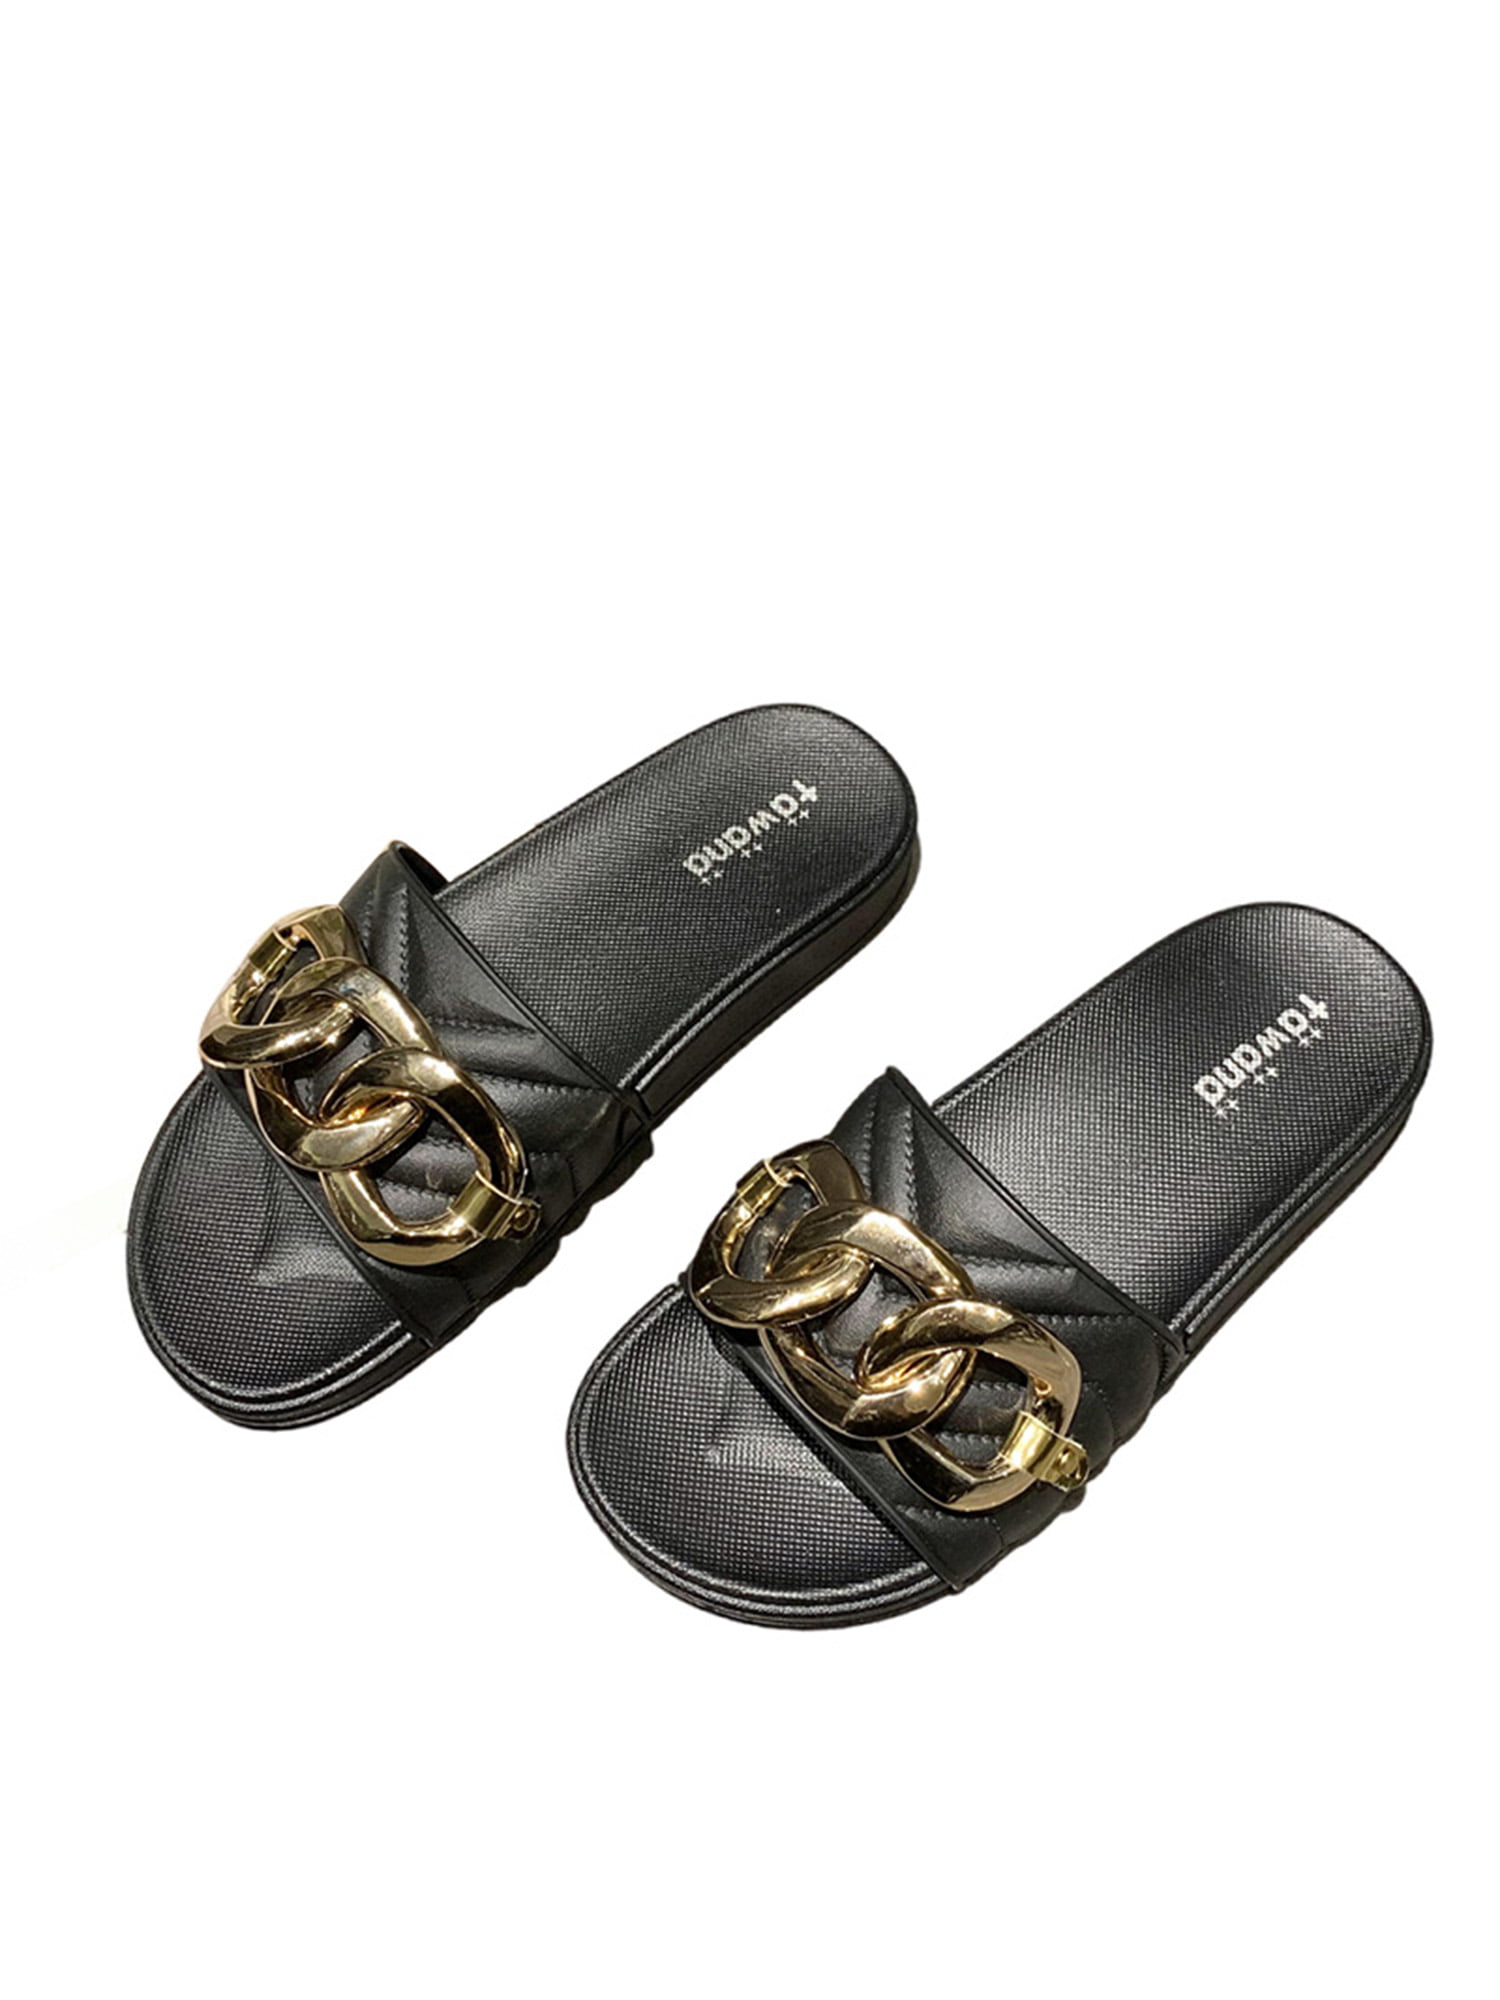 VERSACE Medusa Amplified Slippers in Rosa & Oro | FWRD